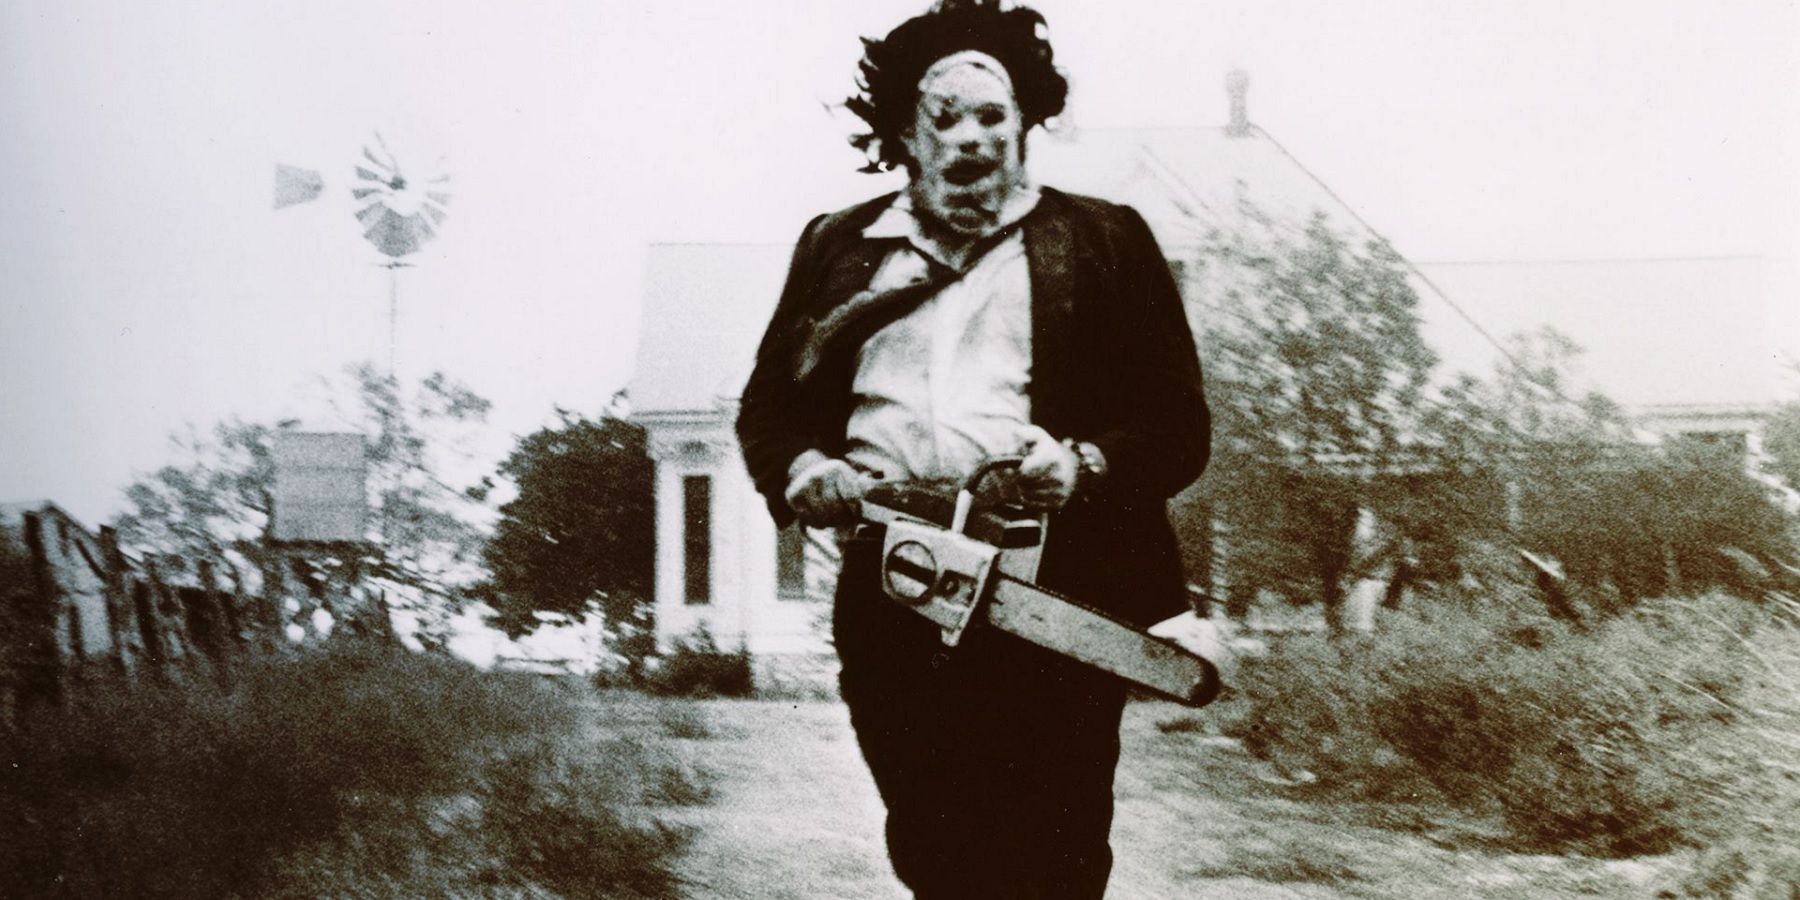 Leatherface running with his saw in The Texas Chain Saw Massacre